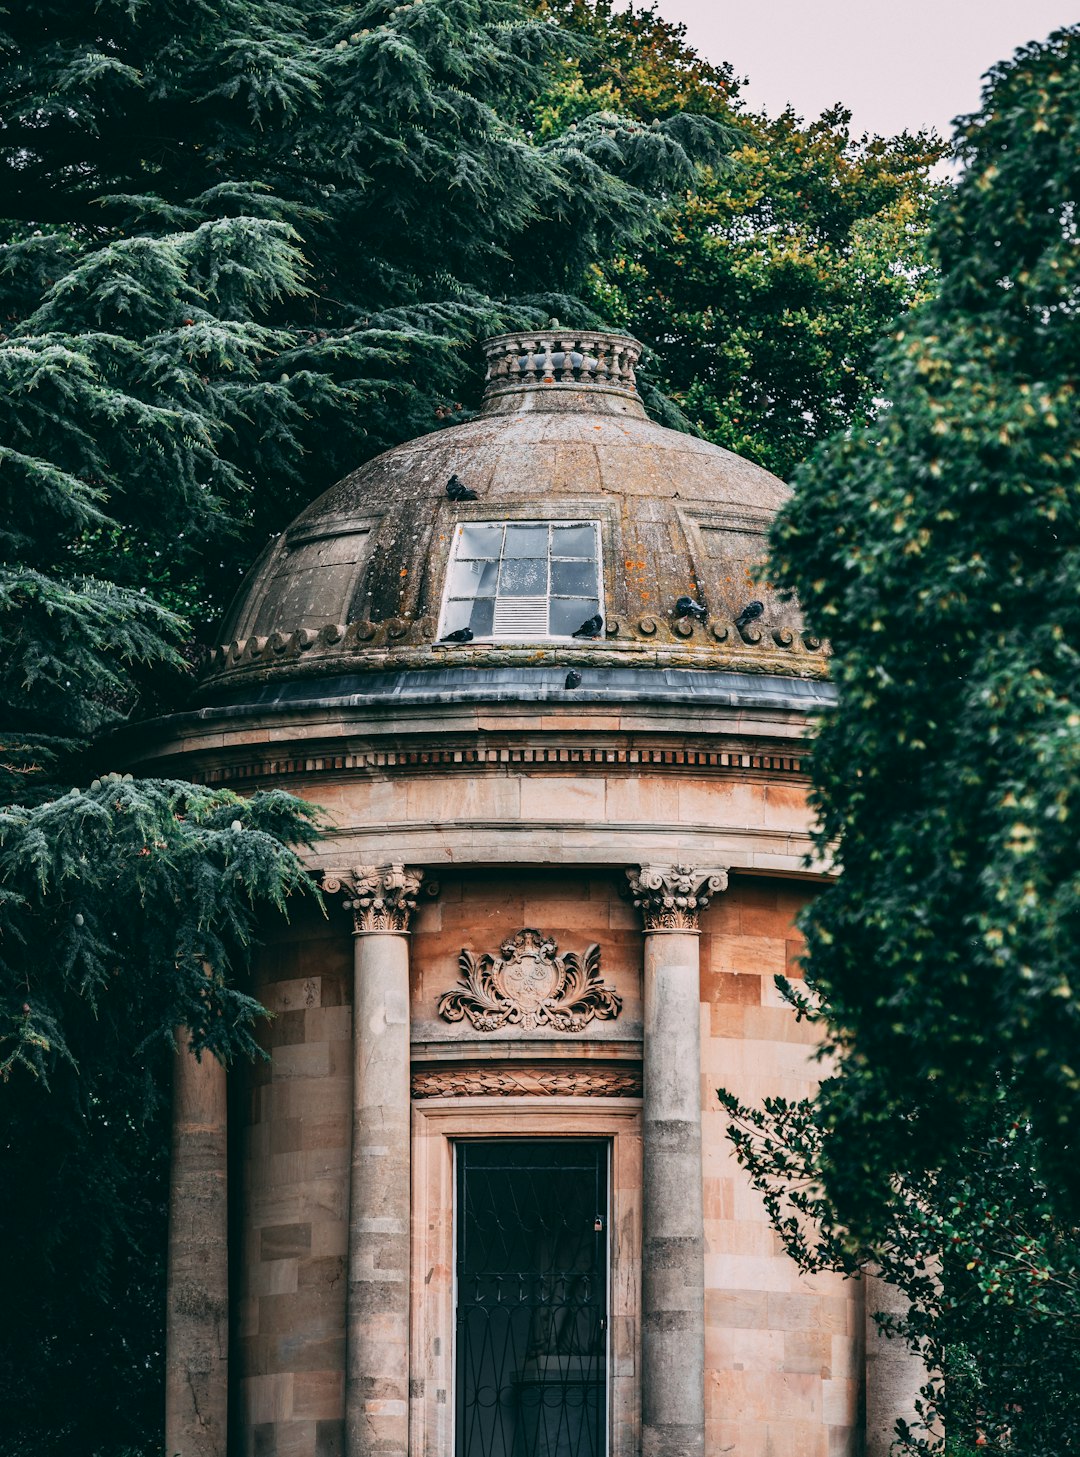 brown dome building surrounded by trees